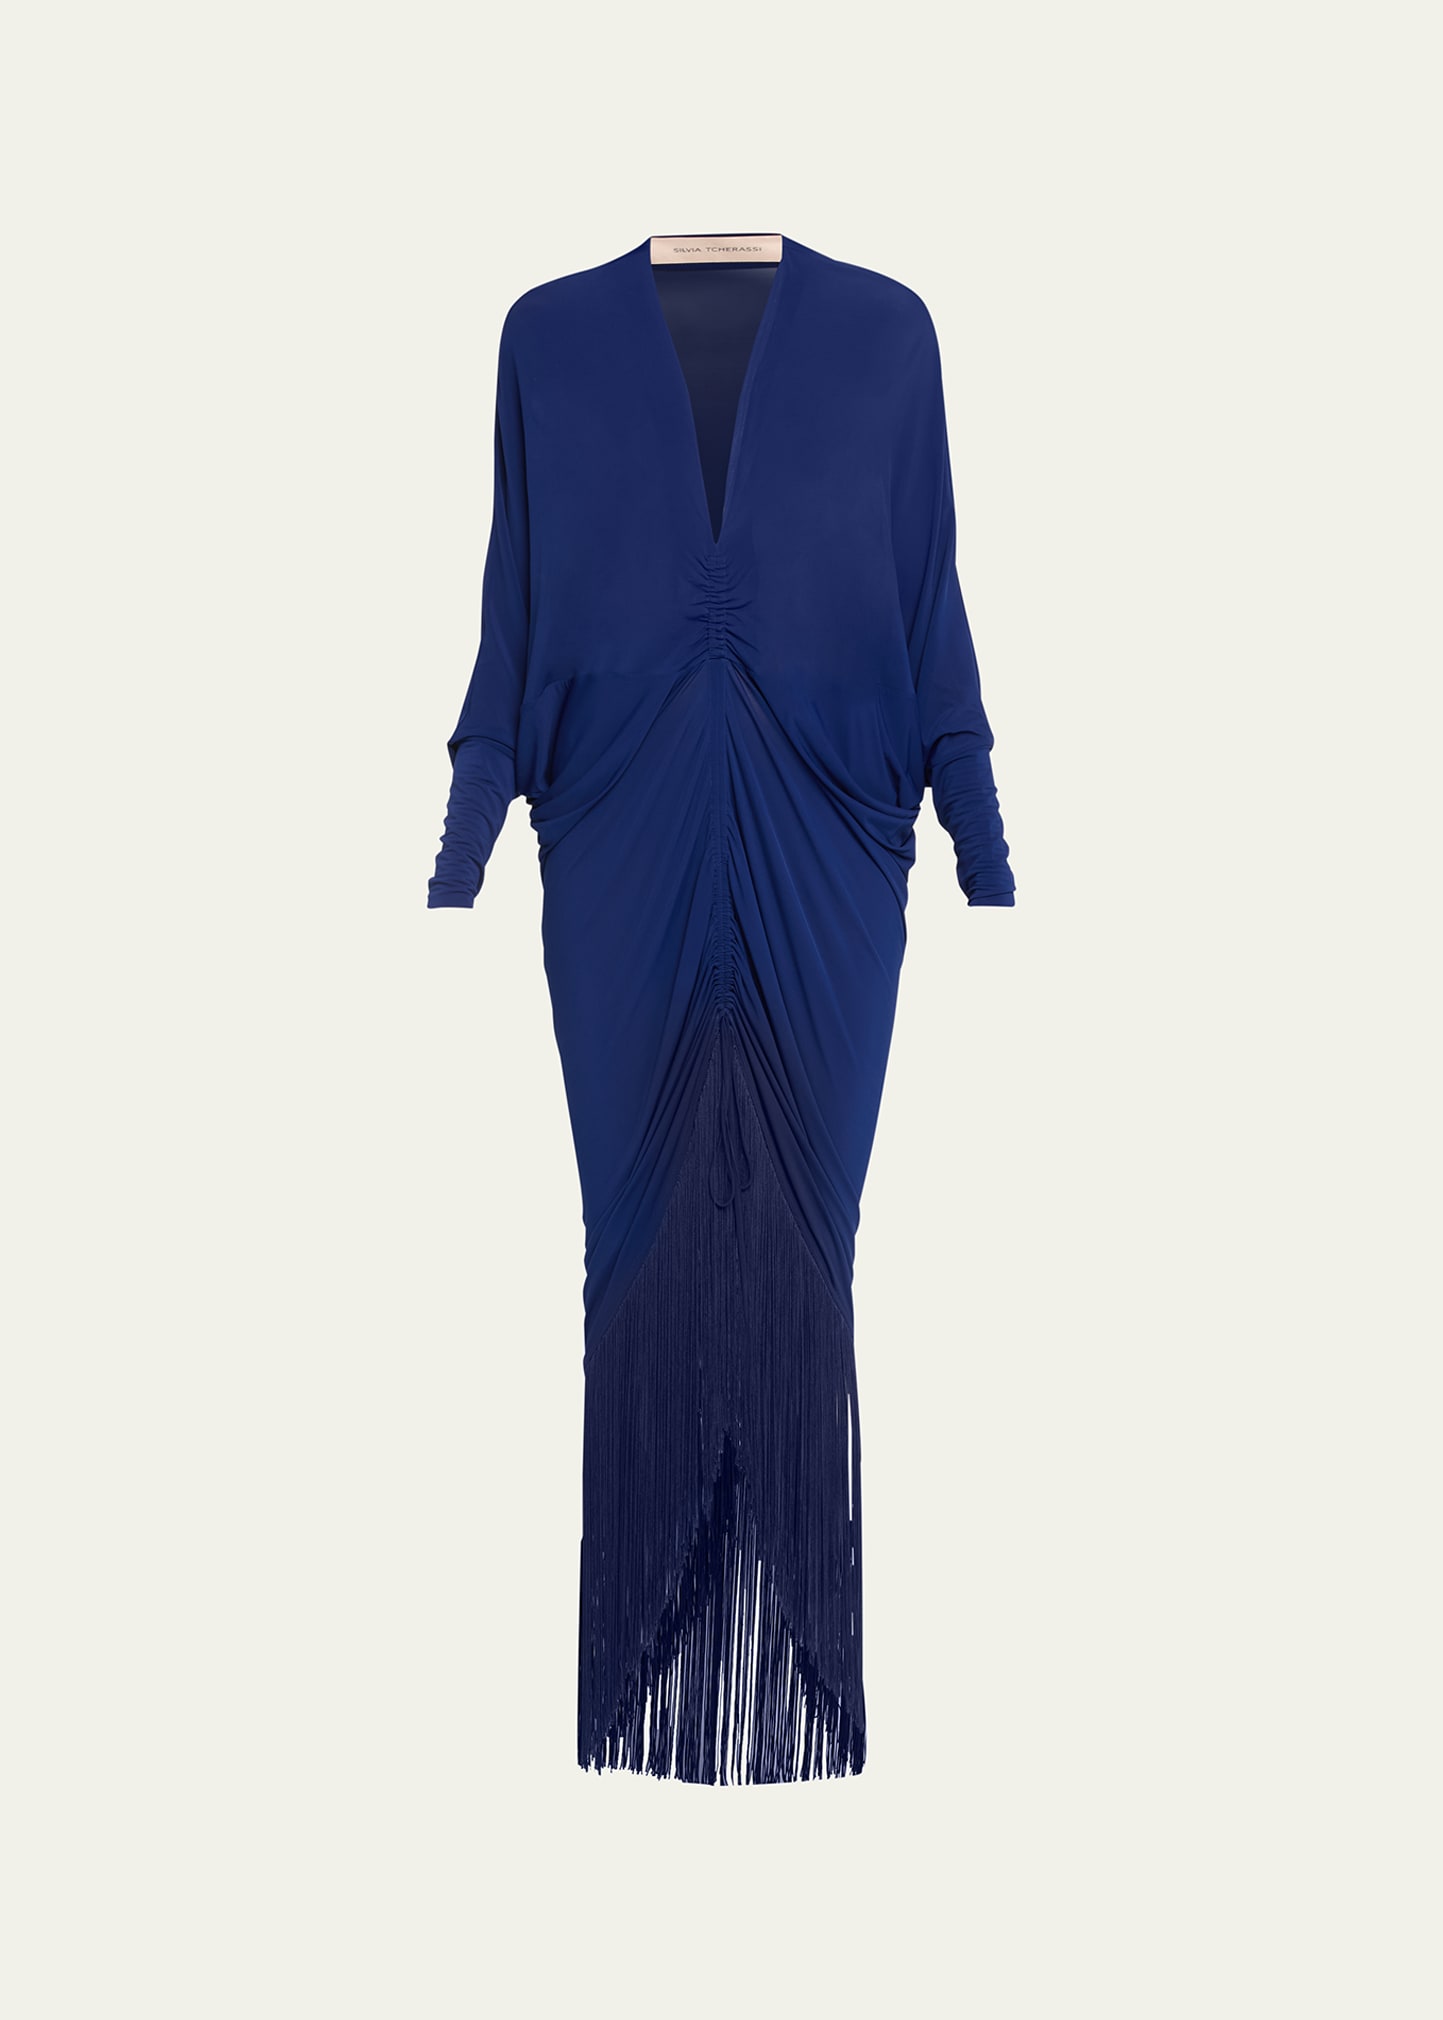 Silvia Tcherassi Rosalyn Ruched Maxi Dress With Fringe Trim In Navy